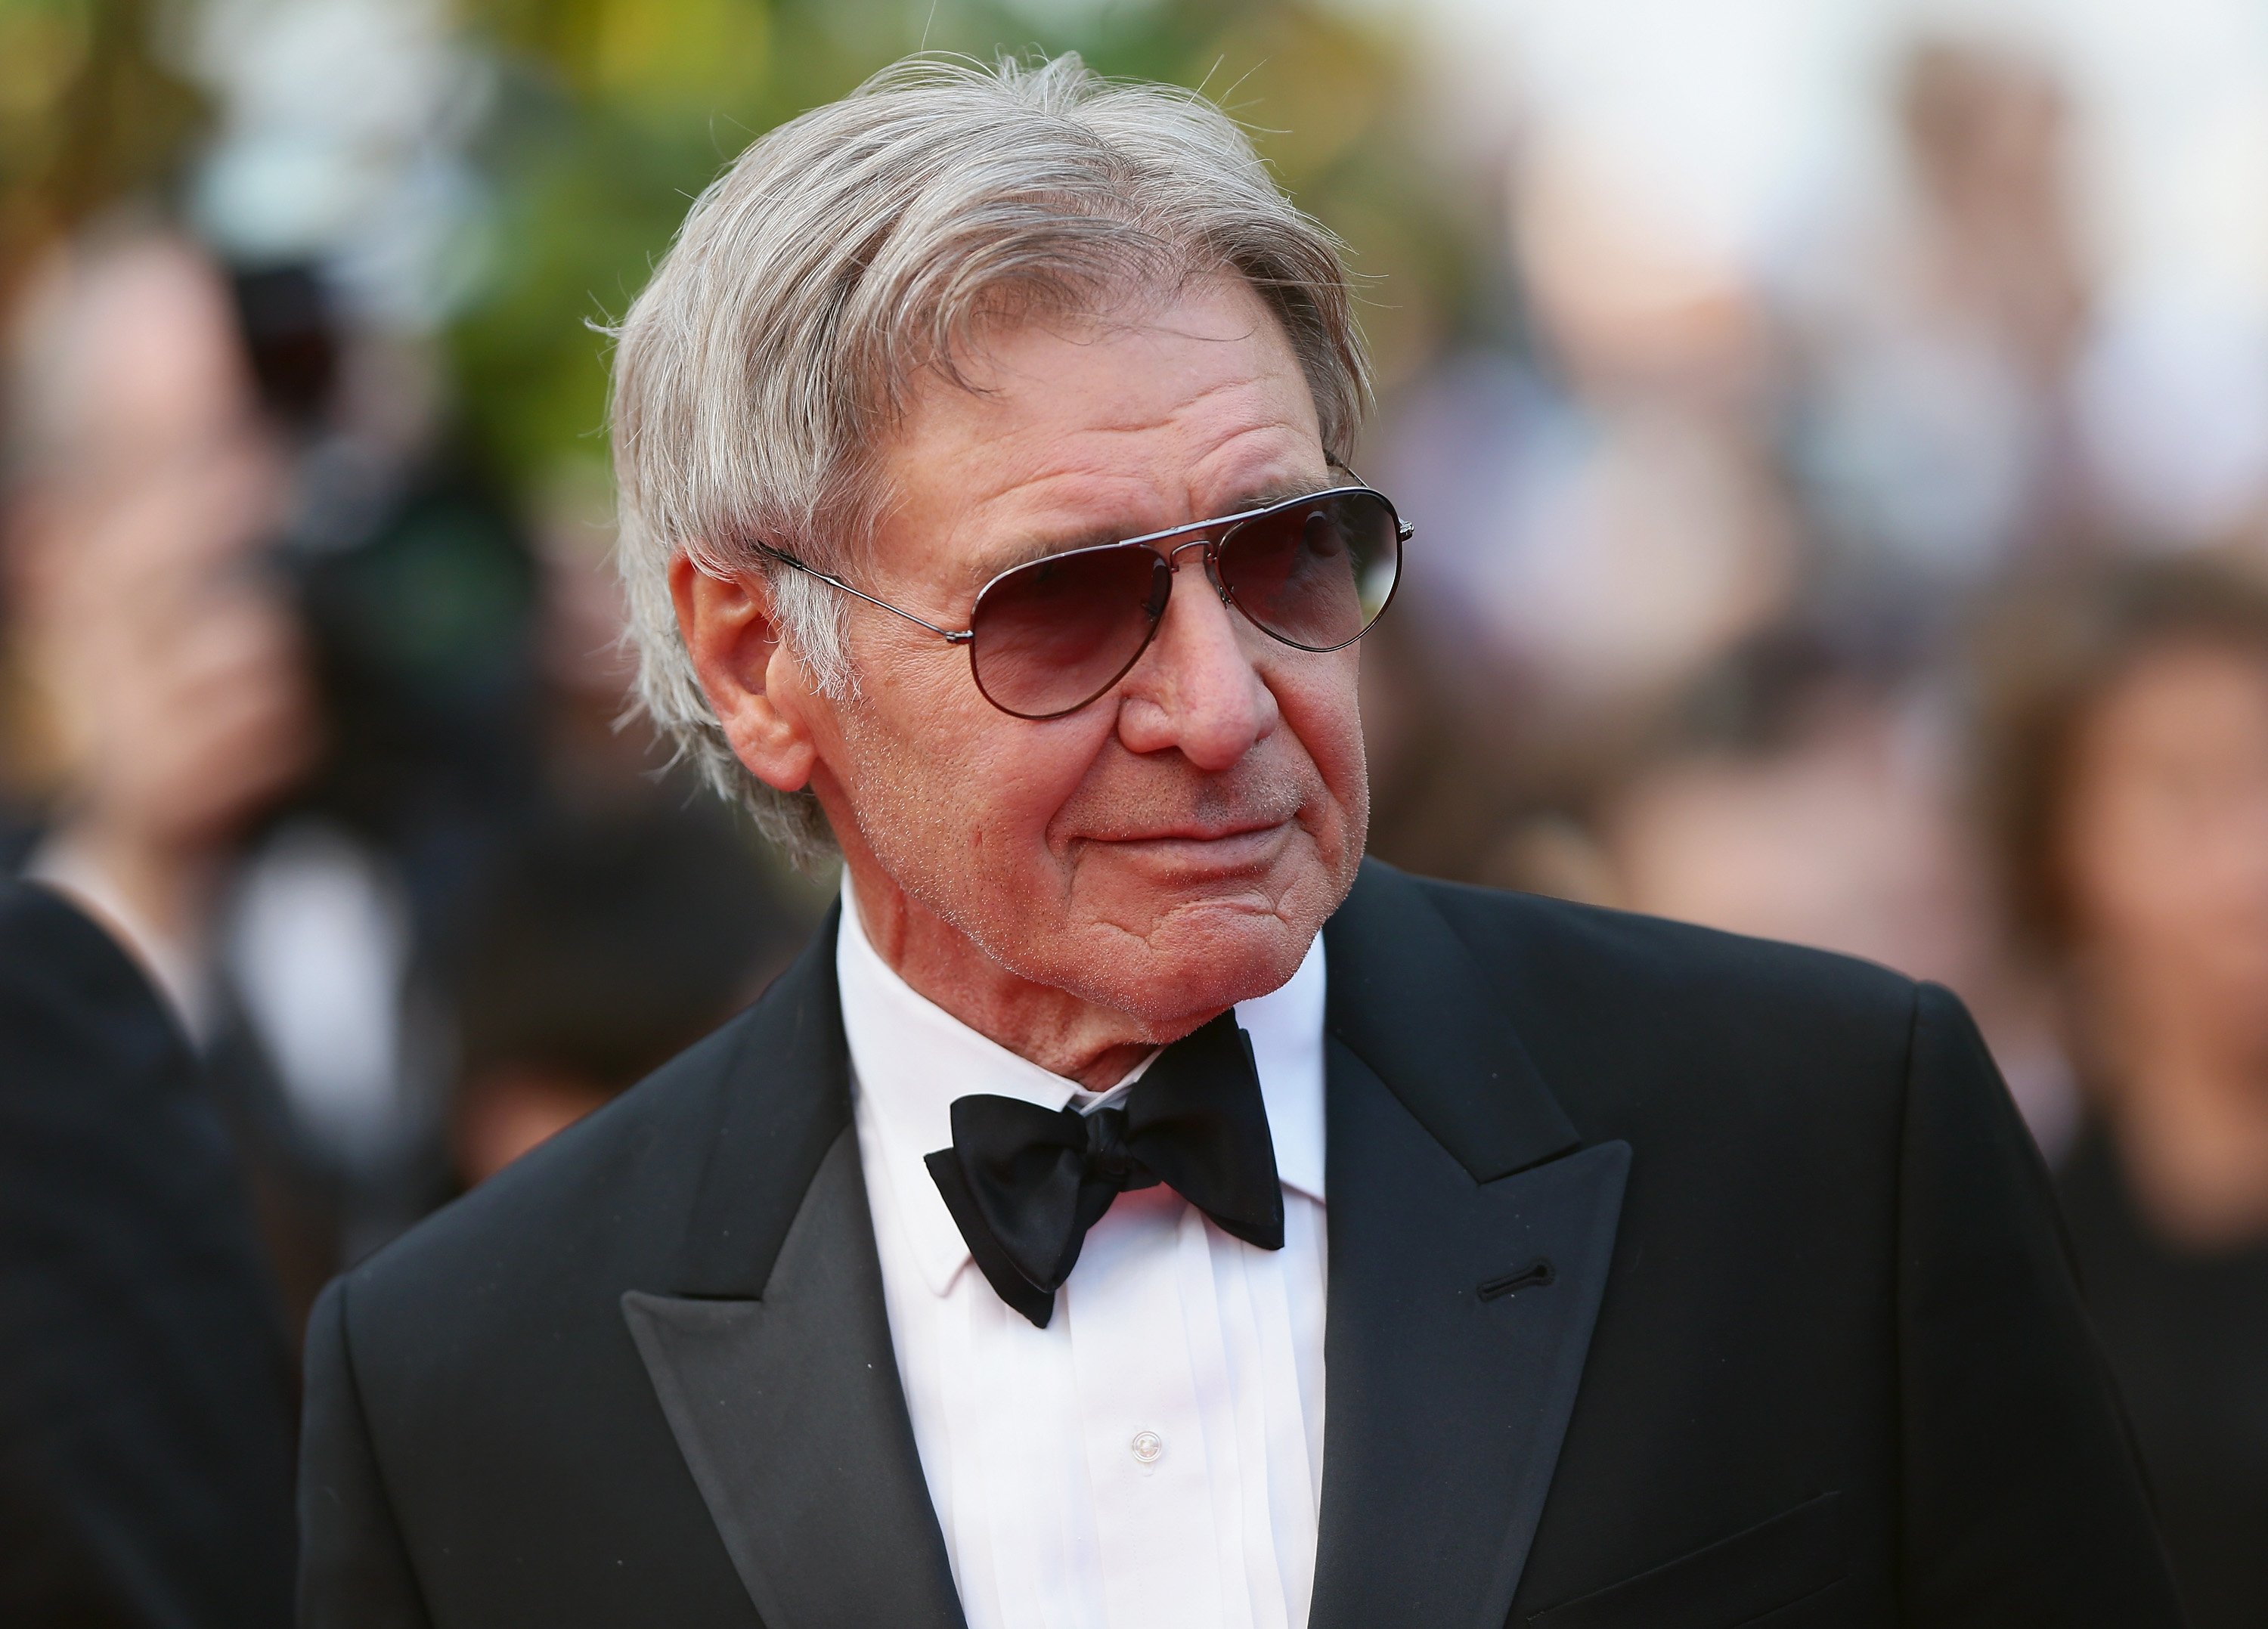 Harrison Ford on May 18, 2014 in Cannes, France | Source: Getty Images